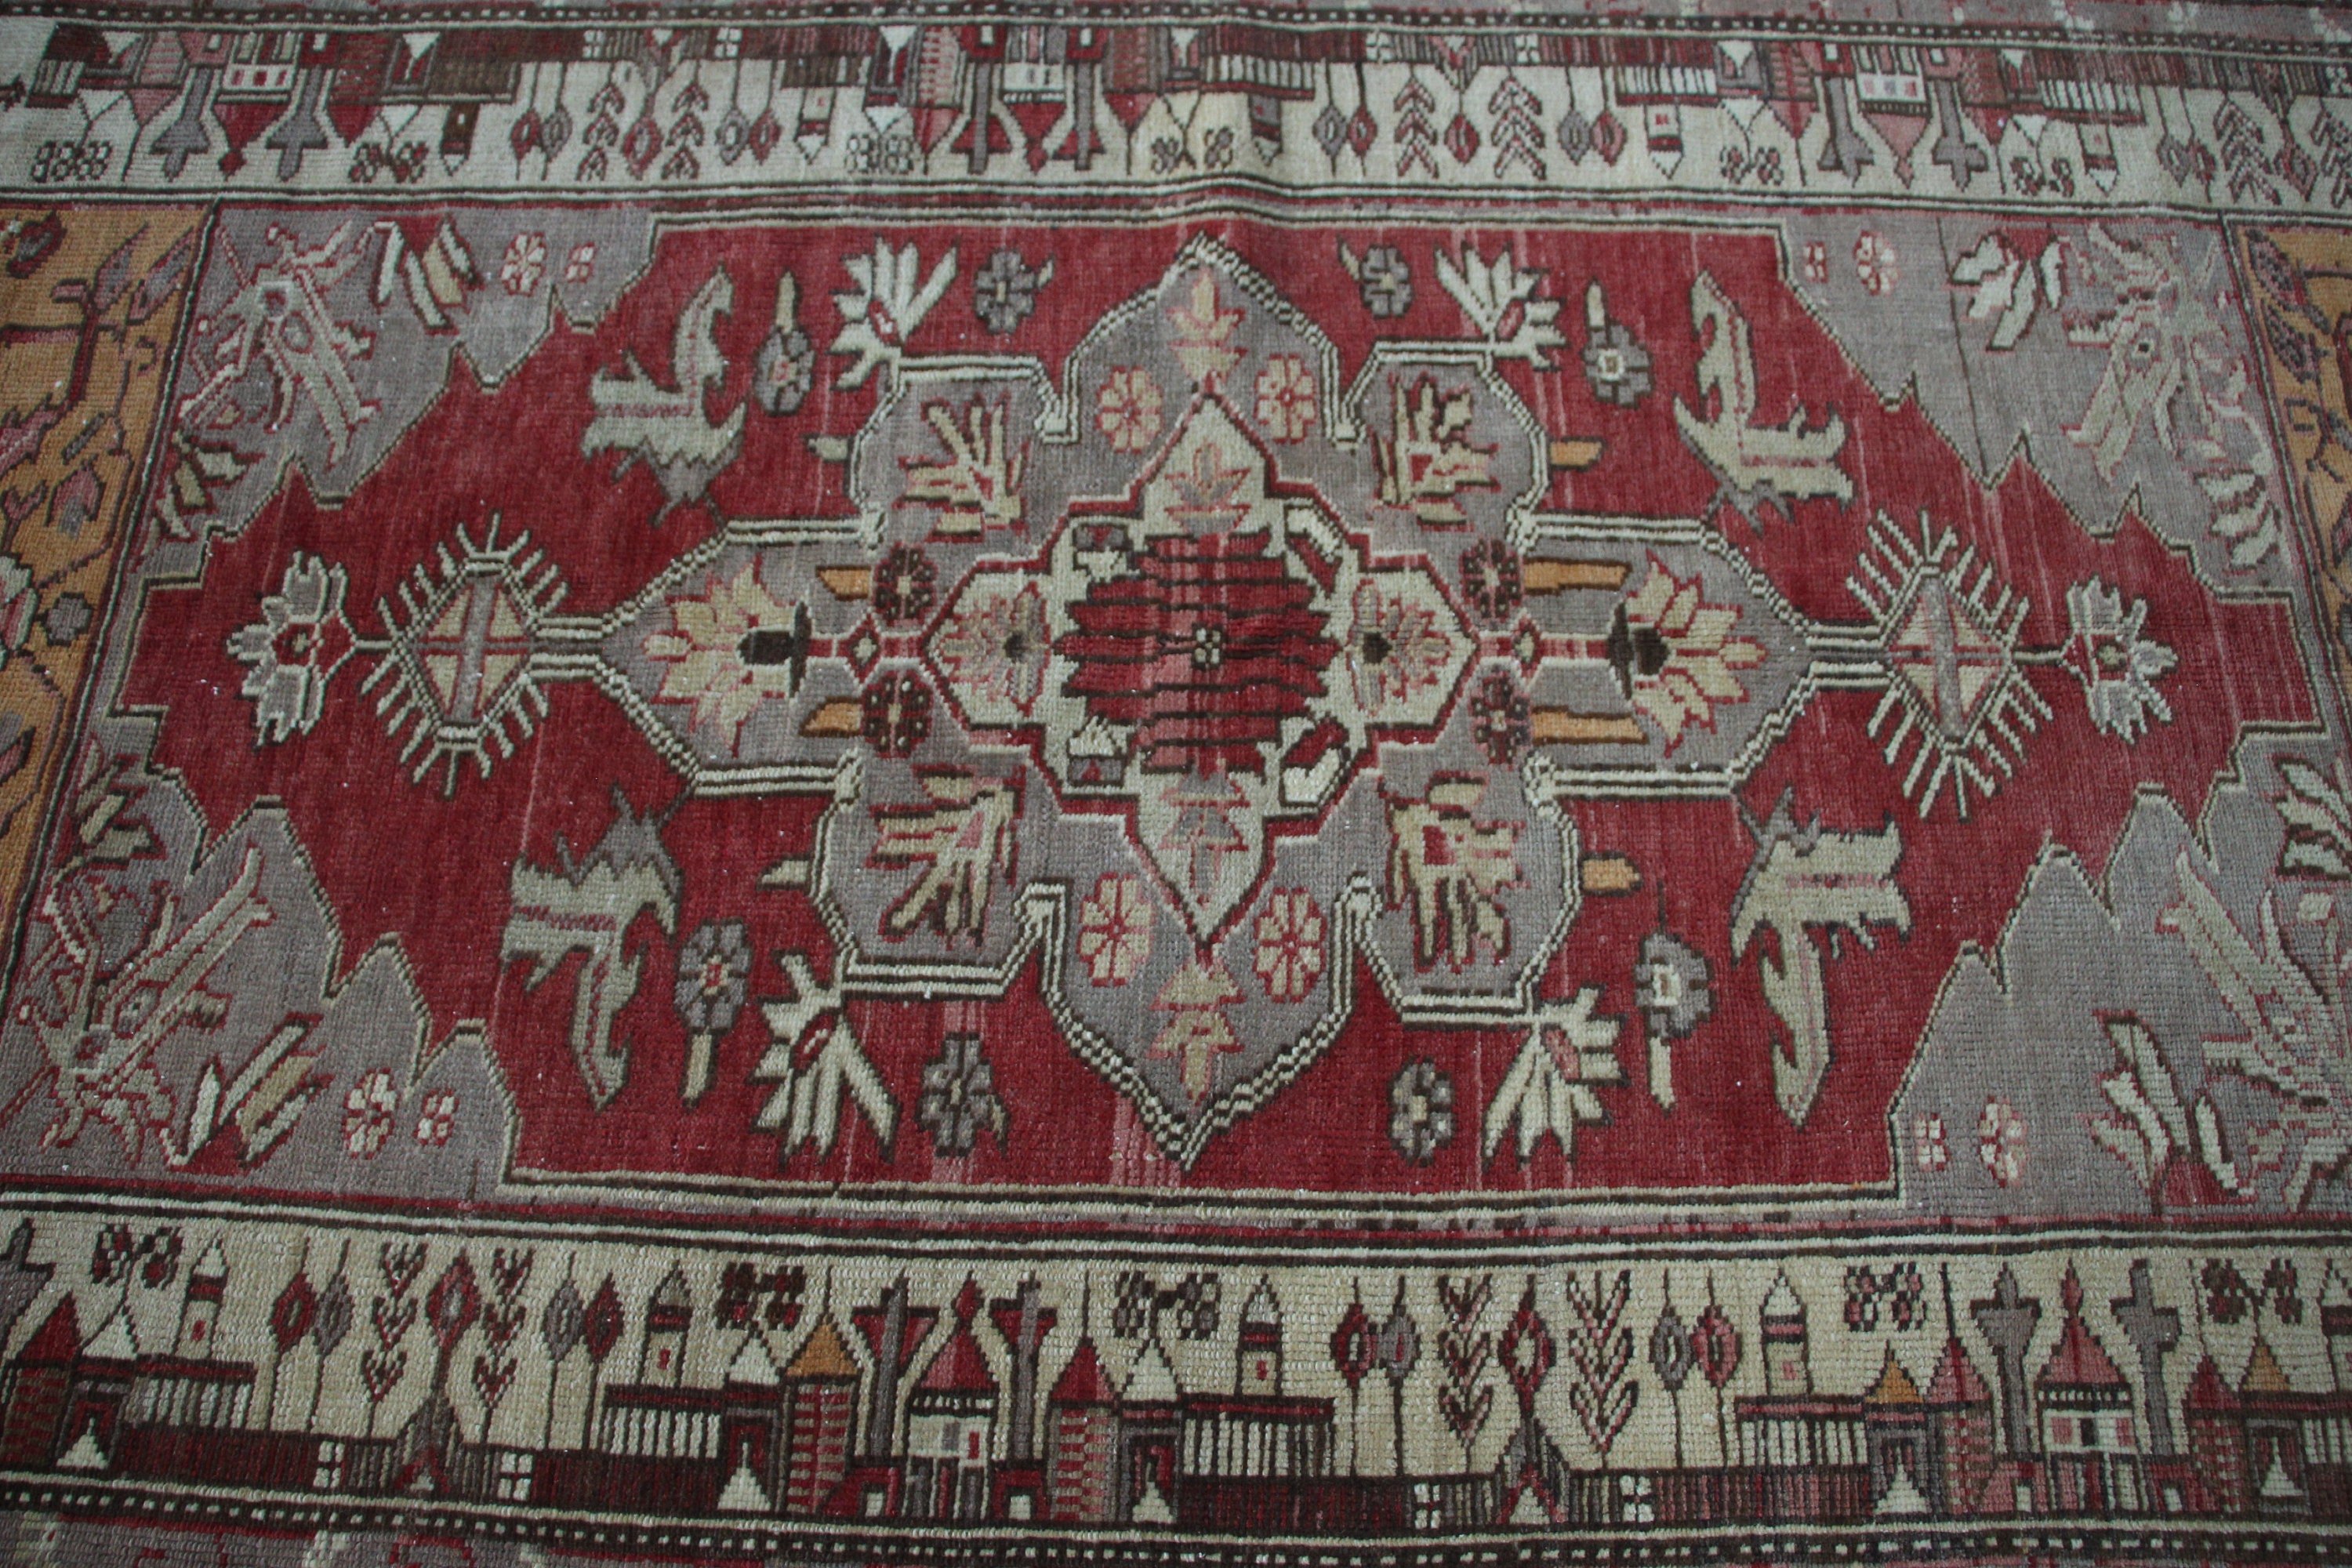 Red Cool Rugs, Entry Rug, Moroccan Rugs, Turkish Rug, Home Decor Rugs, 3.6x6.6 ft Accent Rugs, Bedroom Rugs, Vintage Rug, Rugs for Entry